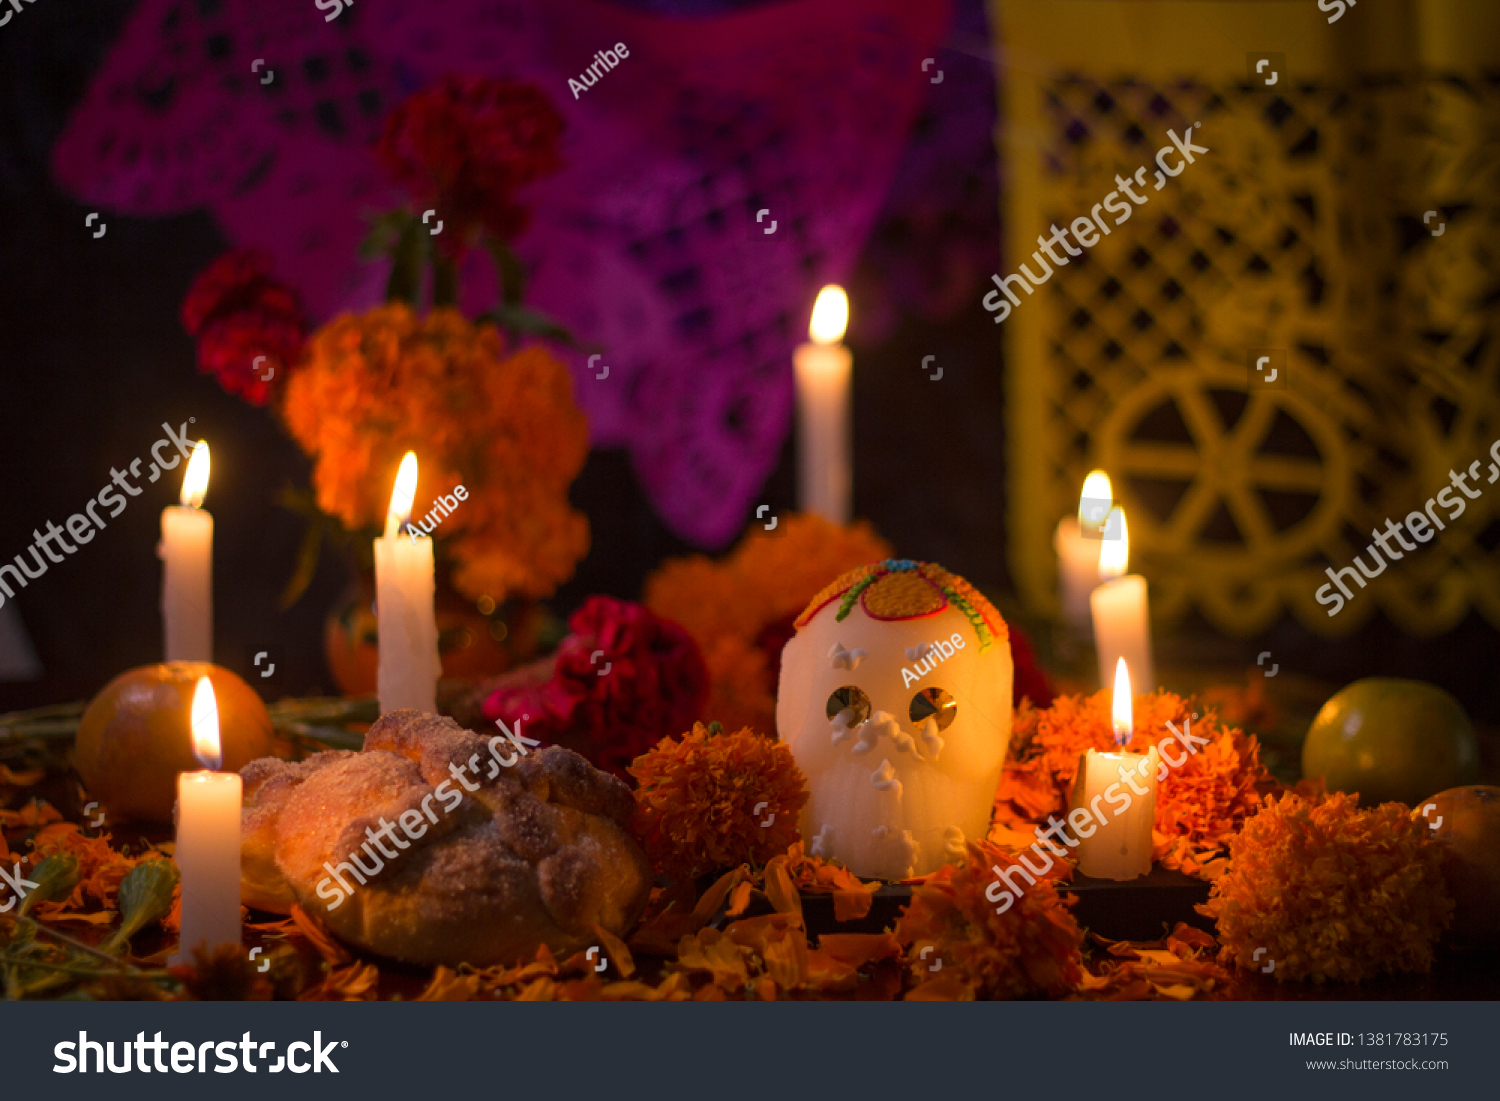 Day of the dead Sugar skull with candles, bread and flowers altar decoration at Janitzio, Michoacan #1381783175